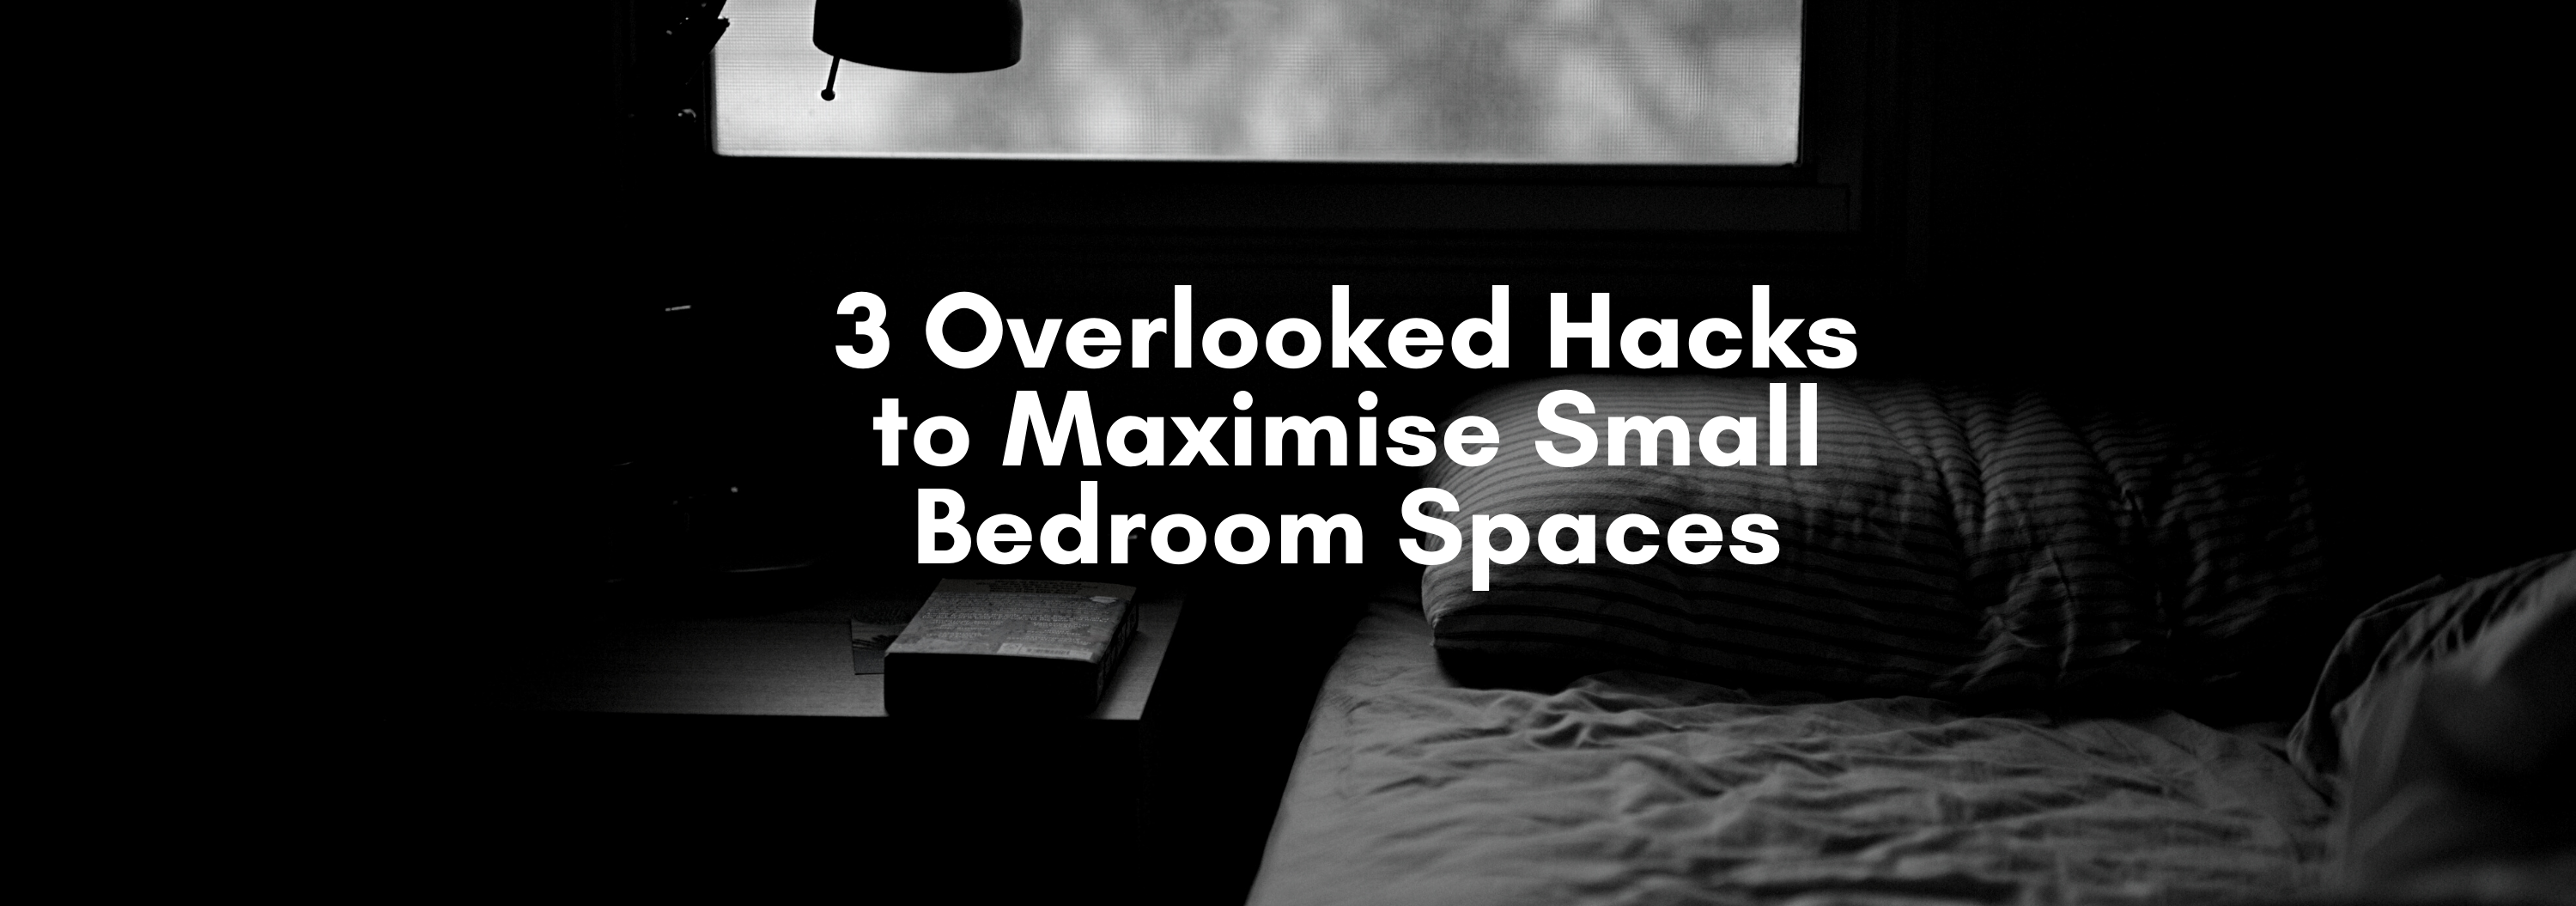 3-Overlooked-Hacks-to-Maximise-Small-Bedroom-Spaces-2